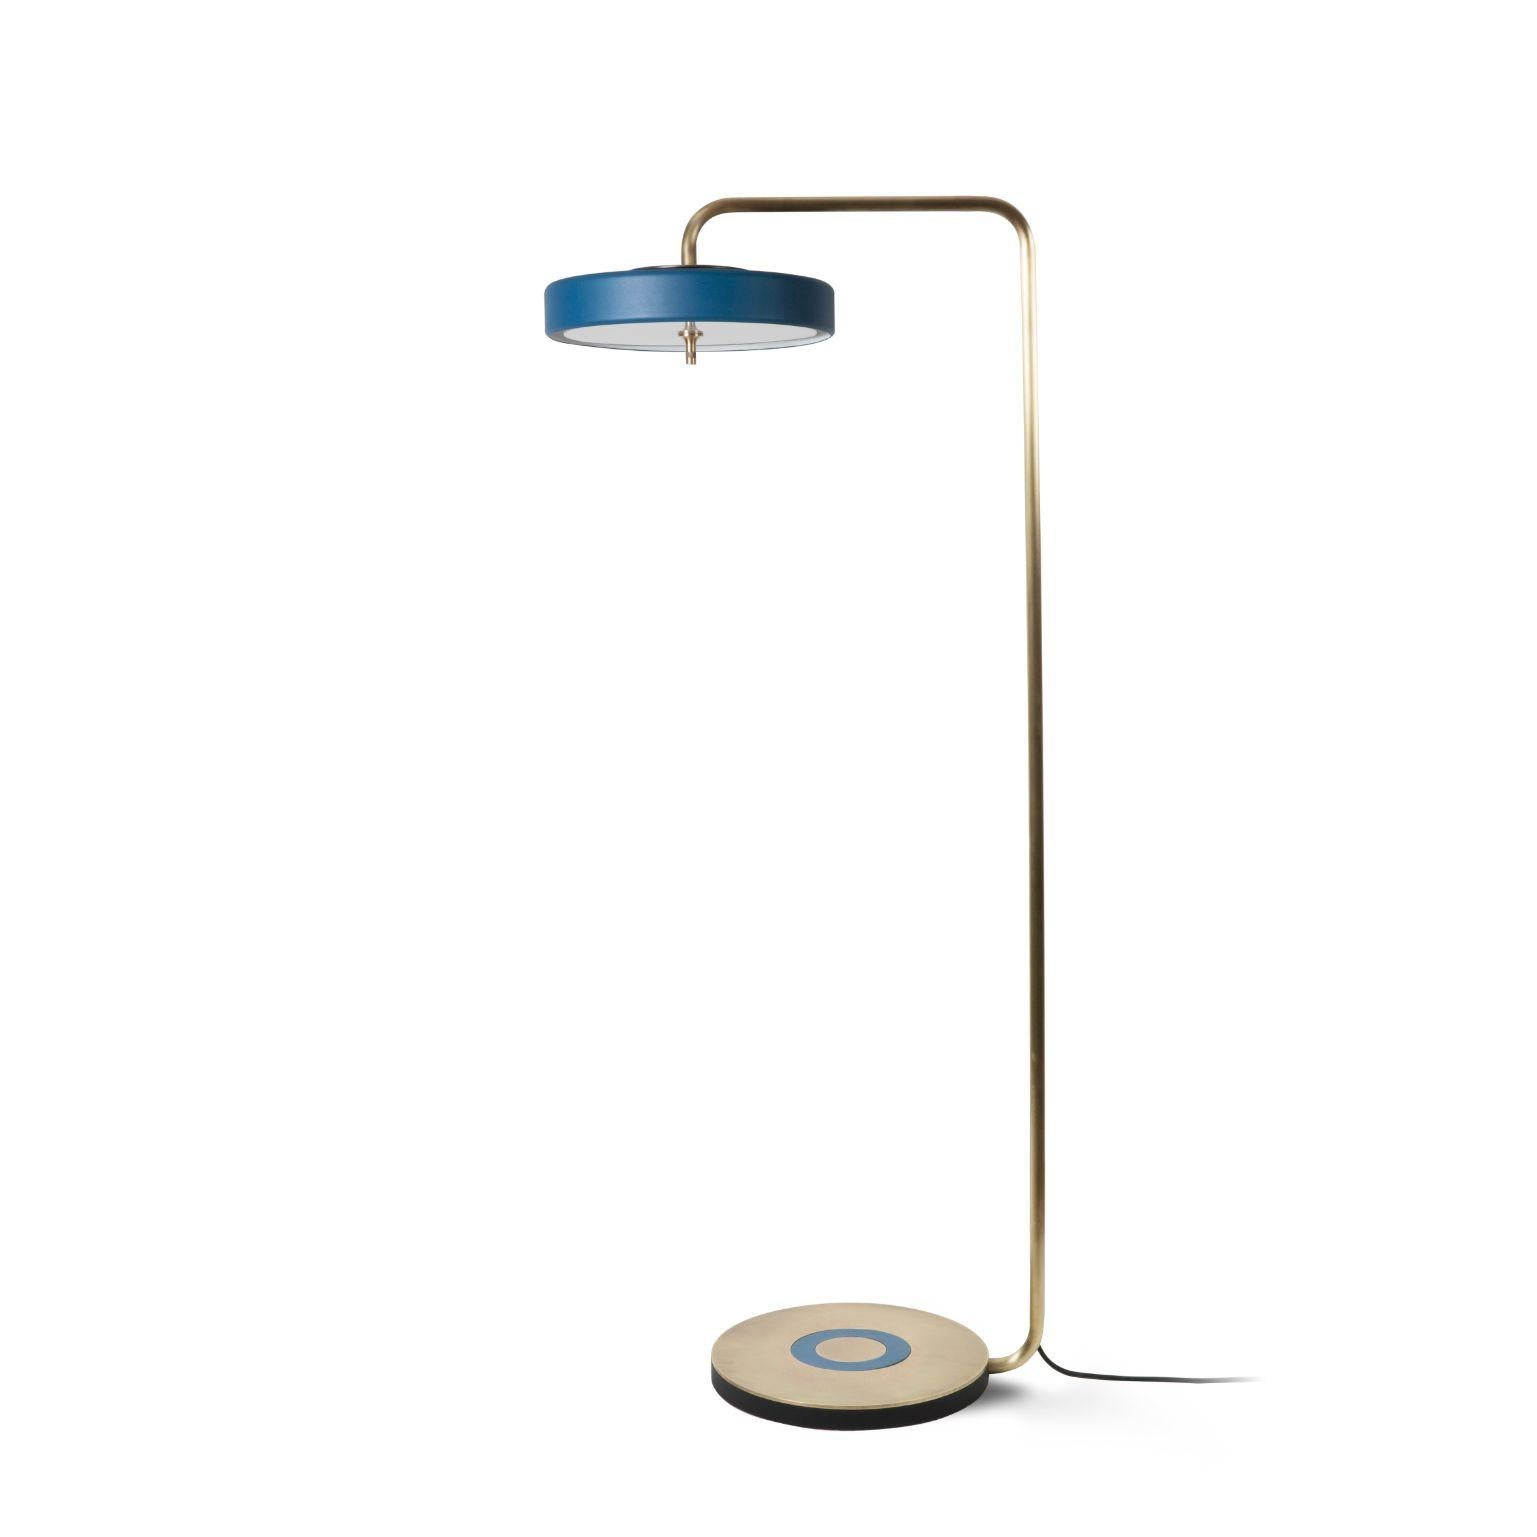 Revolve floor lamp - polished brass - blue by Bert Frank
Dimensions: 130 x 35.4 x 9.3 cm
Materials: Brass, steel

Also Available in brushed brass
When Adam Yeats and Robbie Llewellyn founded Bert Frank in 2013 it was a meeting of minds and the start